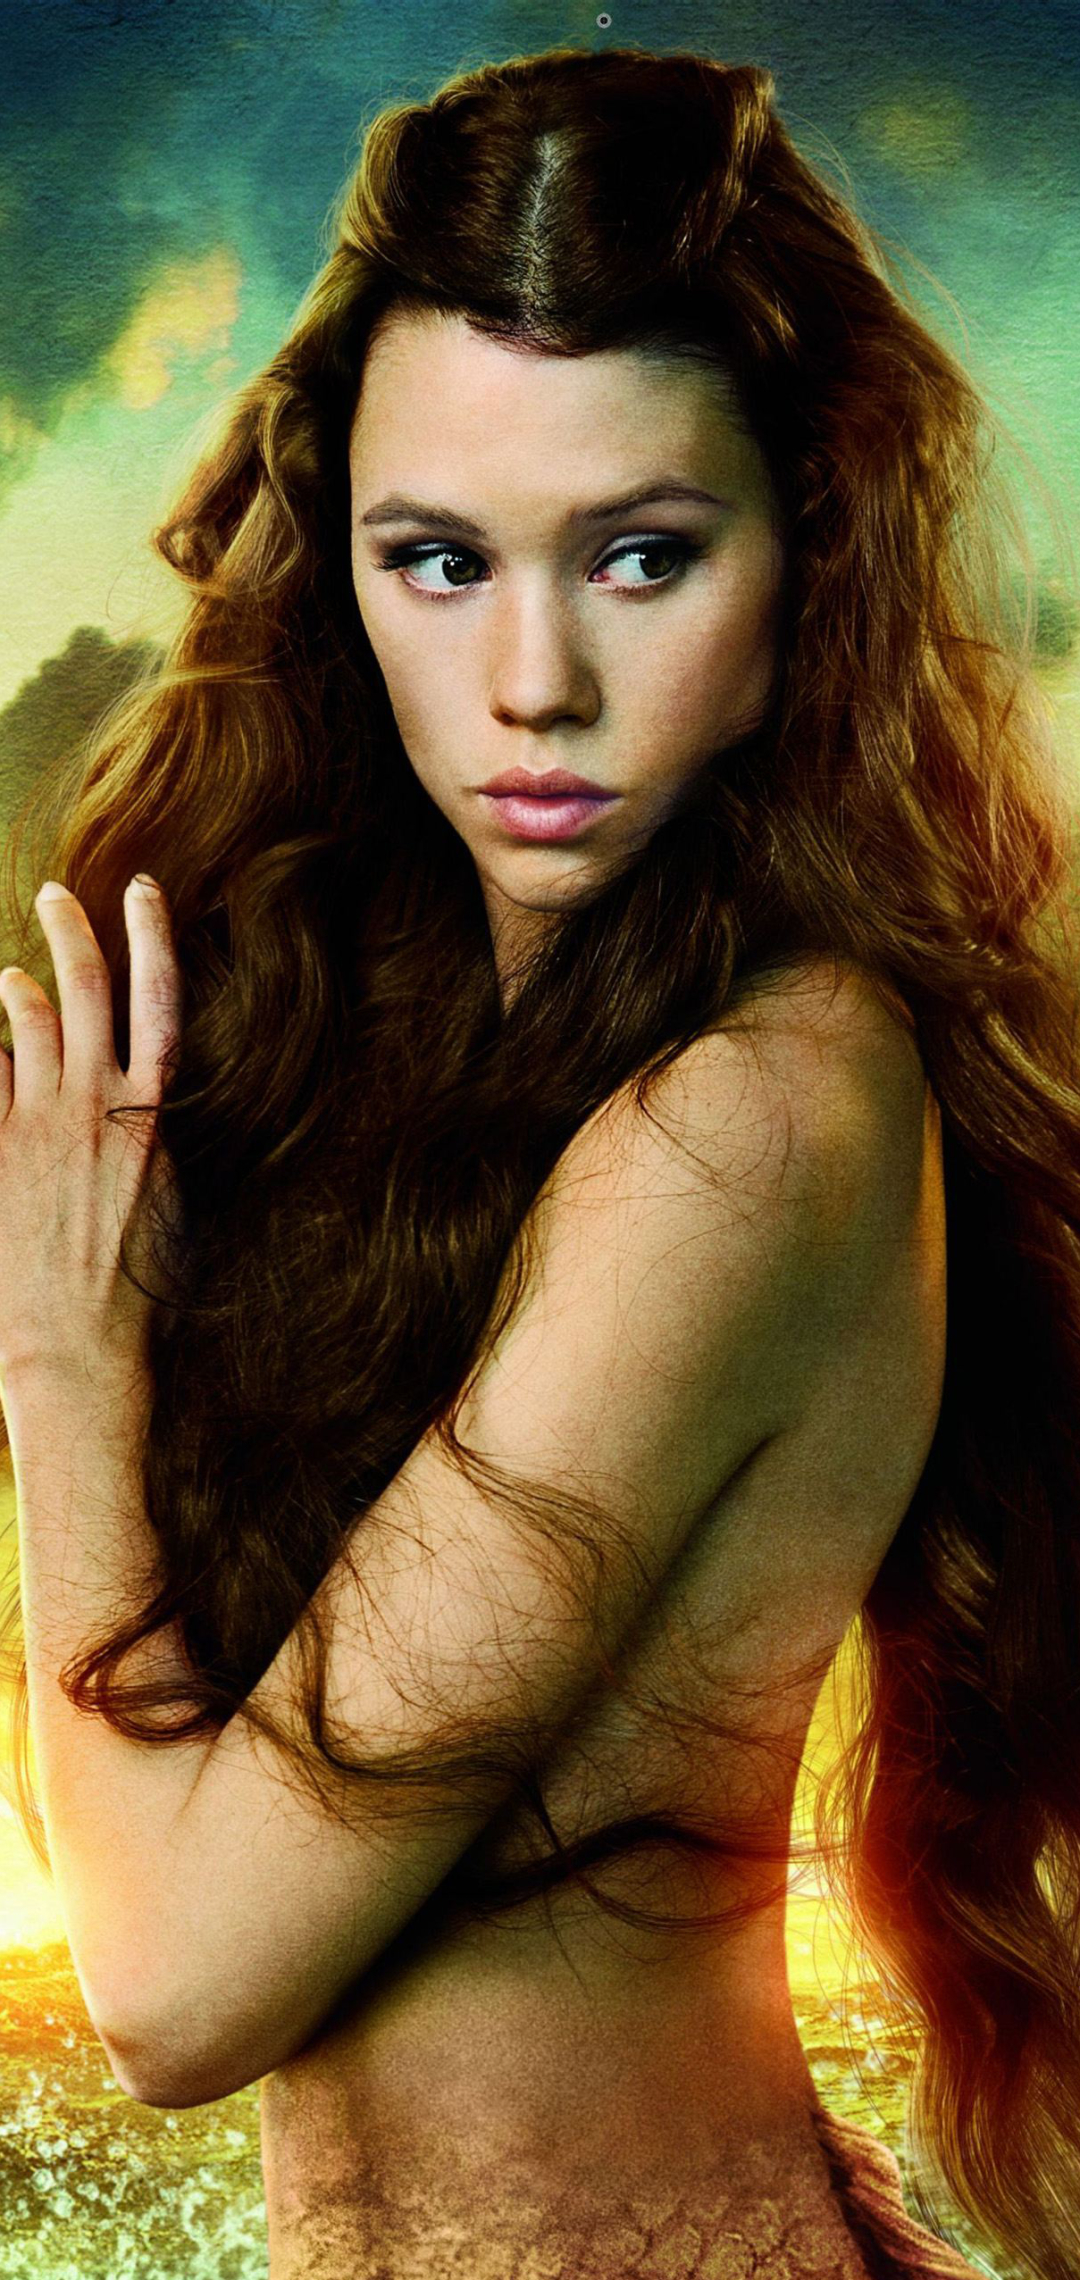 Download mobile wallpaper Pirates Of The Caribbean, Mermaid, Movie, Pirates Of The Caribbean: On Stranger Tides, Syrena (Pirates Of The Caribbean), Astrid Bergès Frisbey for free.